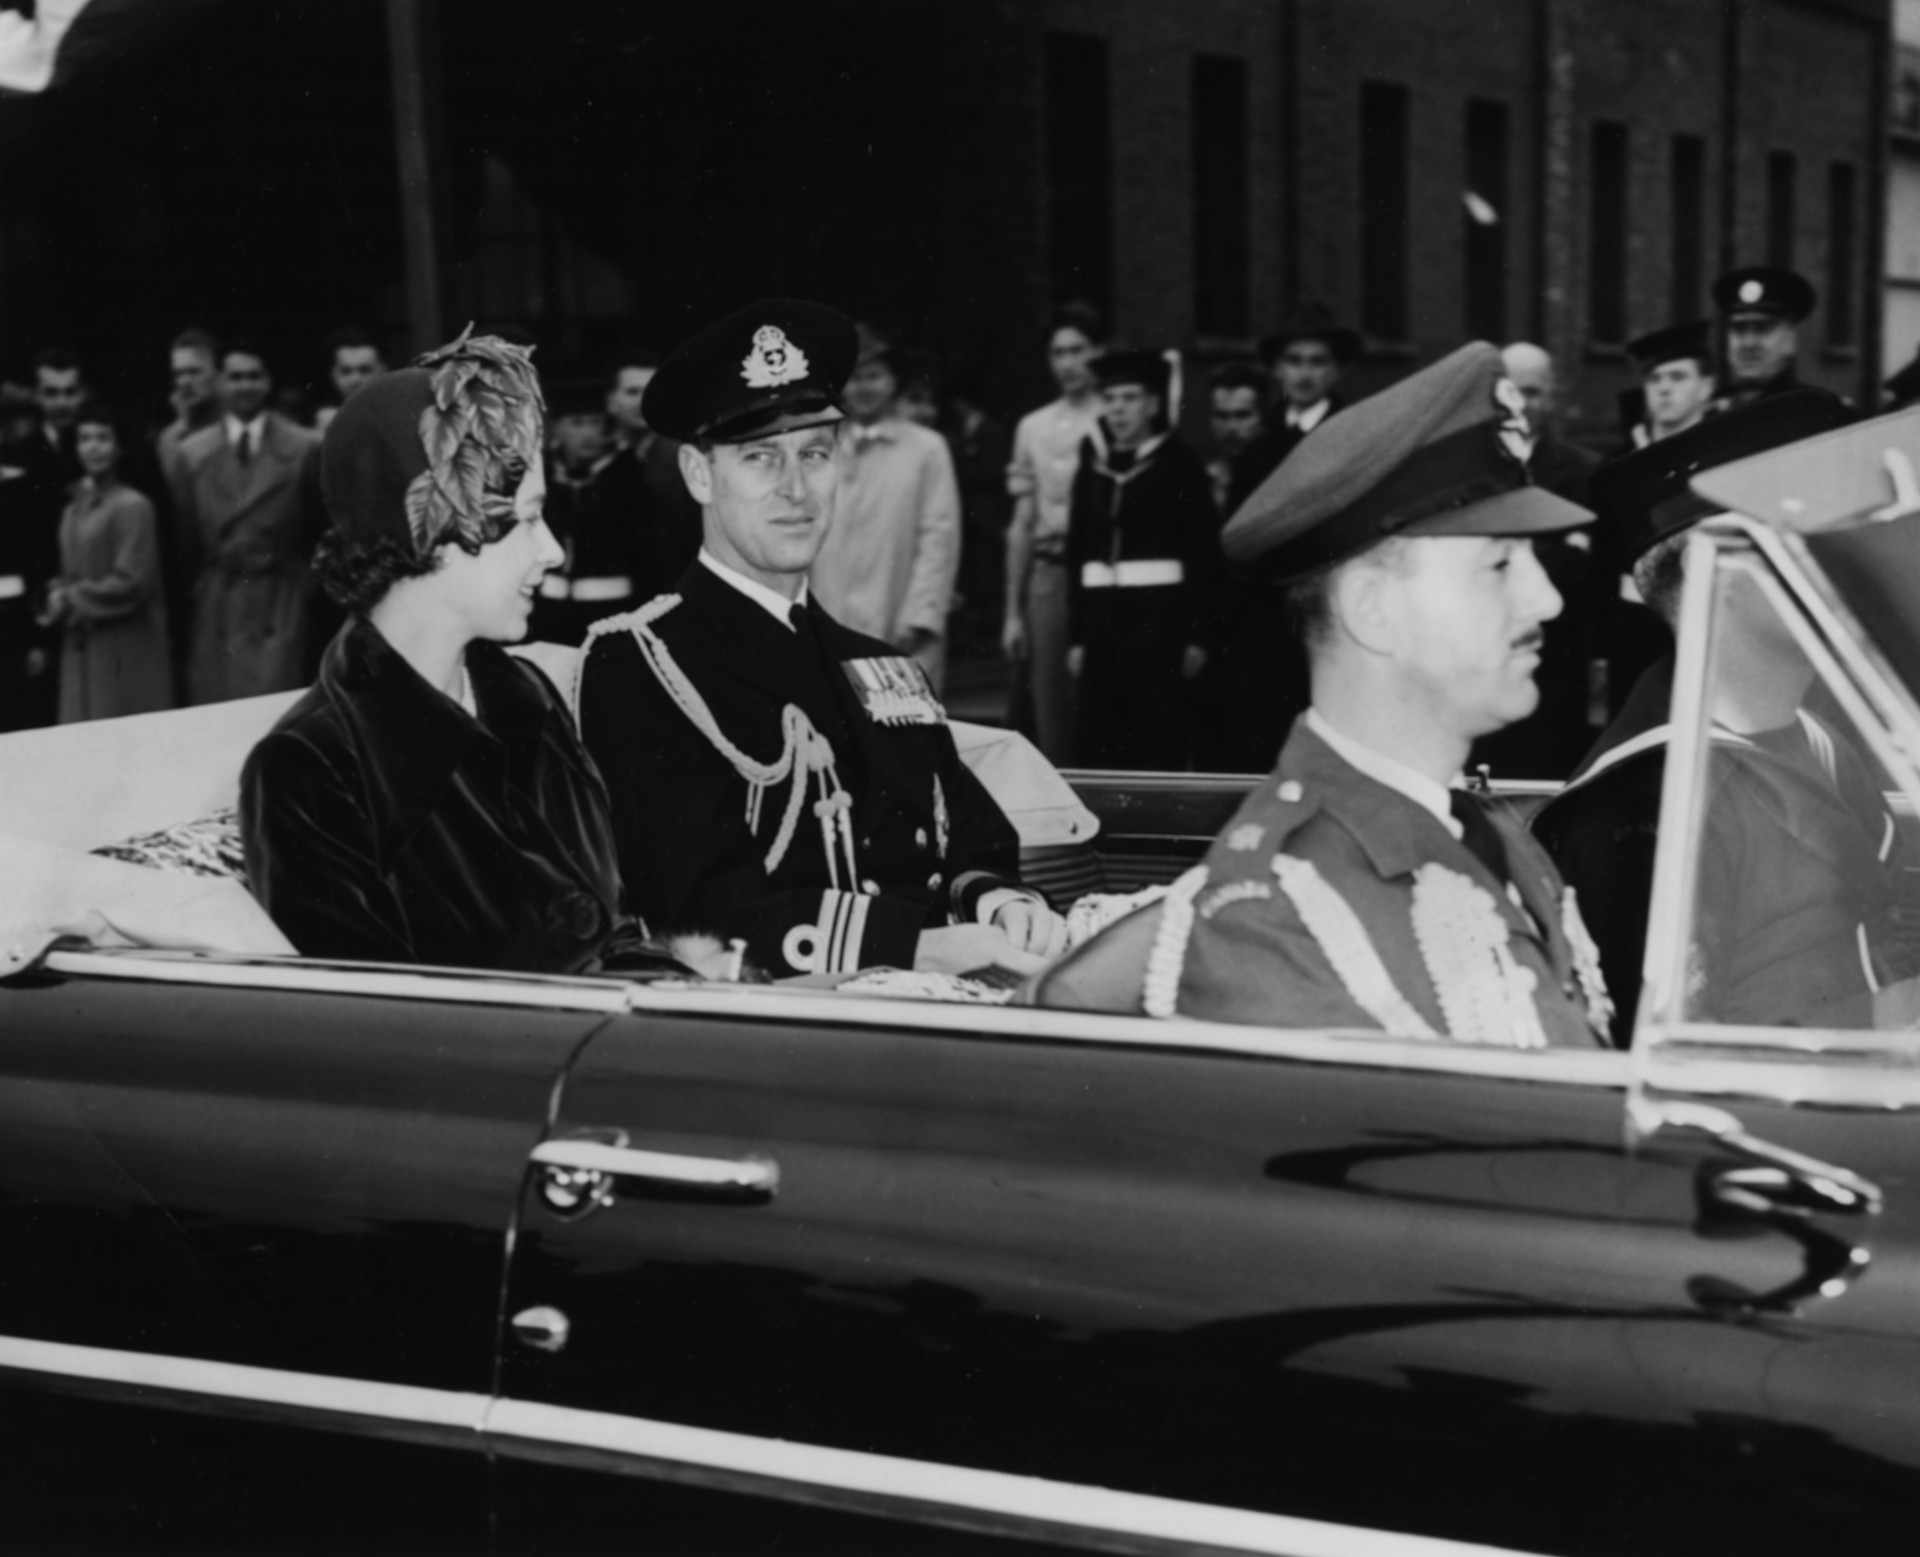 Princess Elizabeth and Prince Philip ride through crowded streets in Quebec.<p><a href="https://www.msn.com/en-nz/community/channel/vid-7xx8mnucu55yw63we9va2gwr7uihbxwc68fxqp25x6tg4ftibpra?cvid=94631541bc0f4f89bfd59158d696ad7e">Follow us and access great exclusive content every day</a></p>